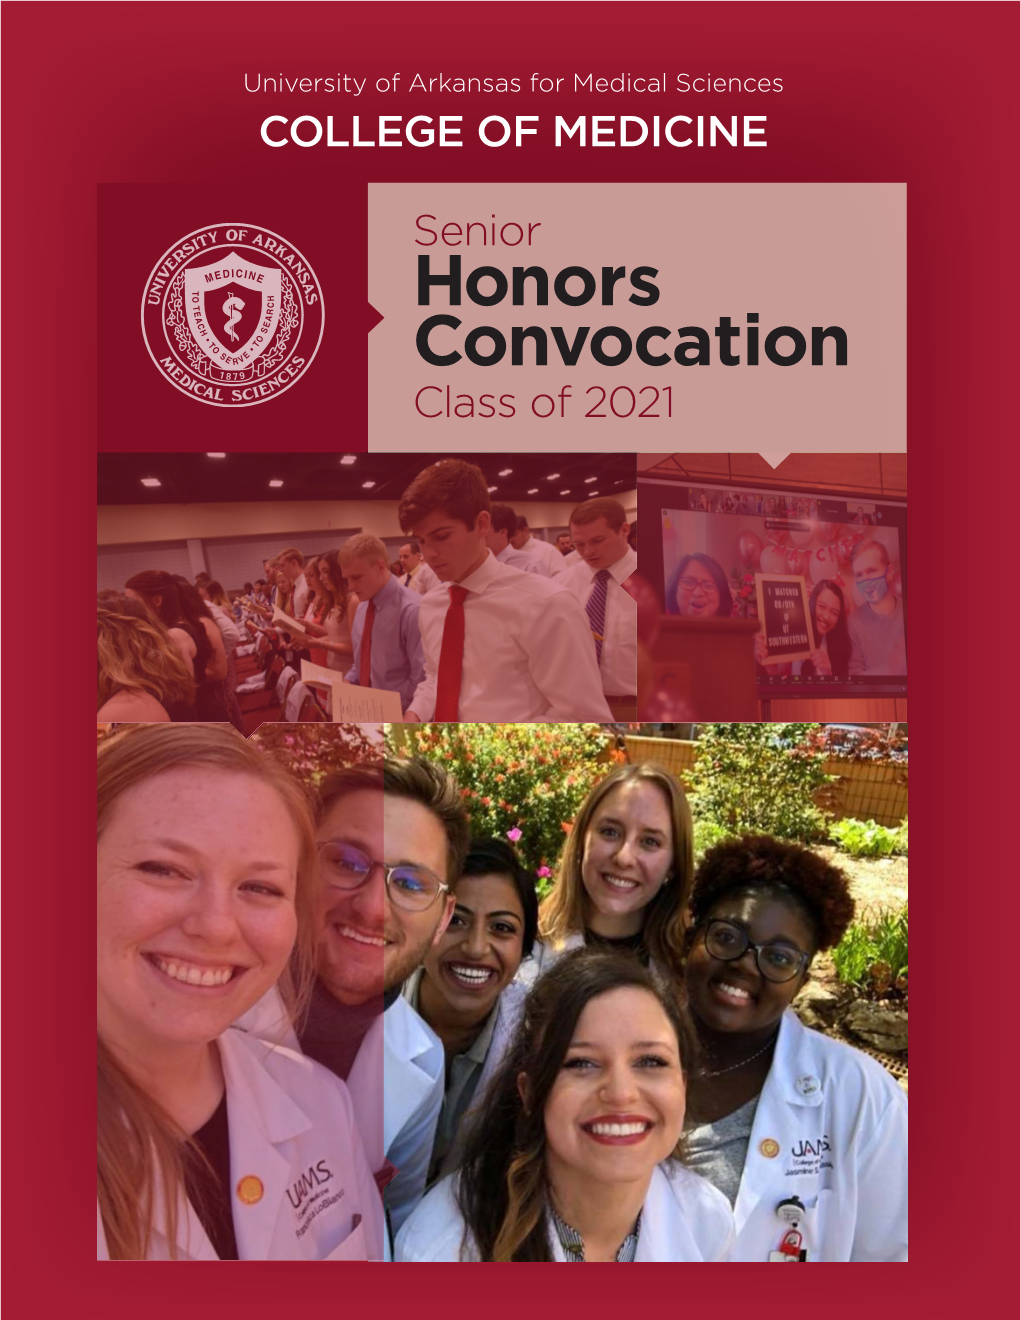 Honors Convocation Class of 2021